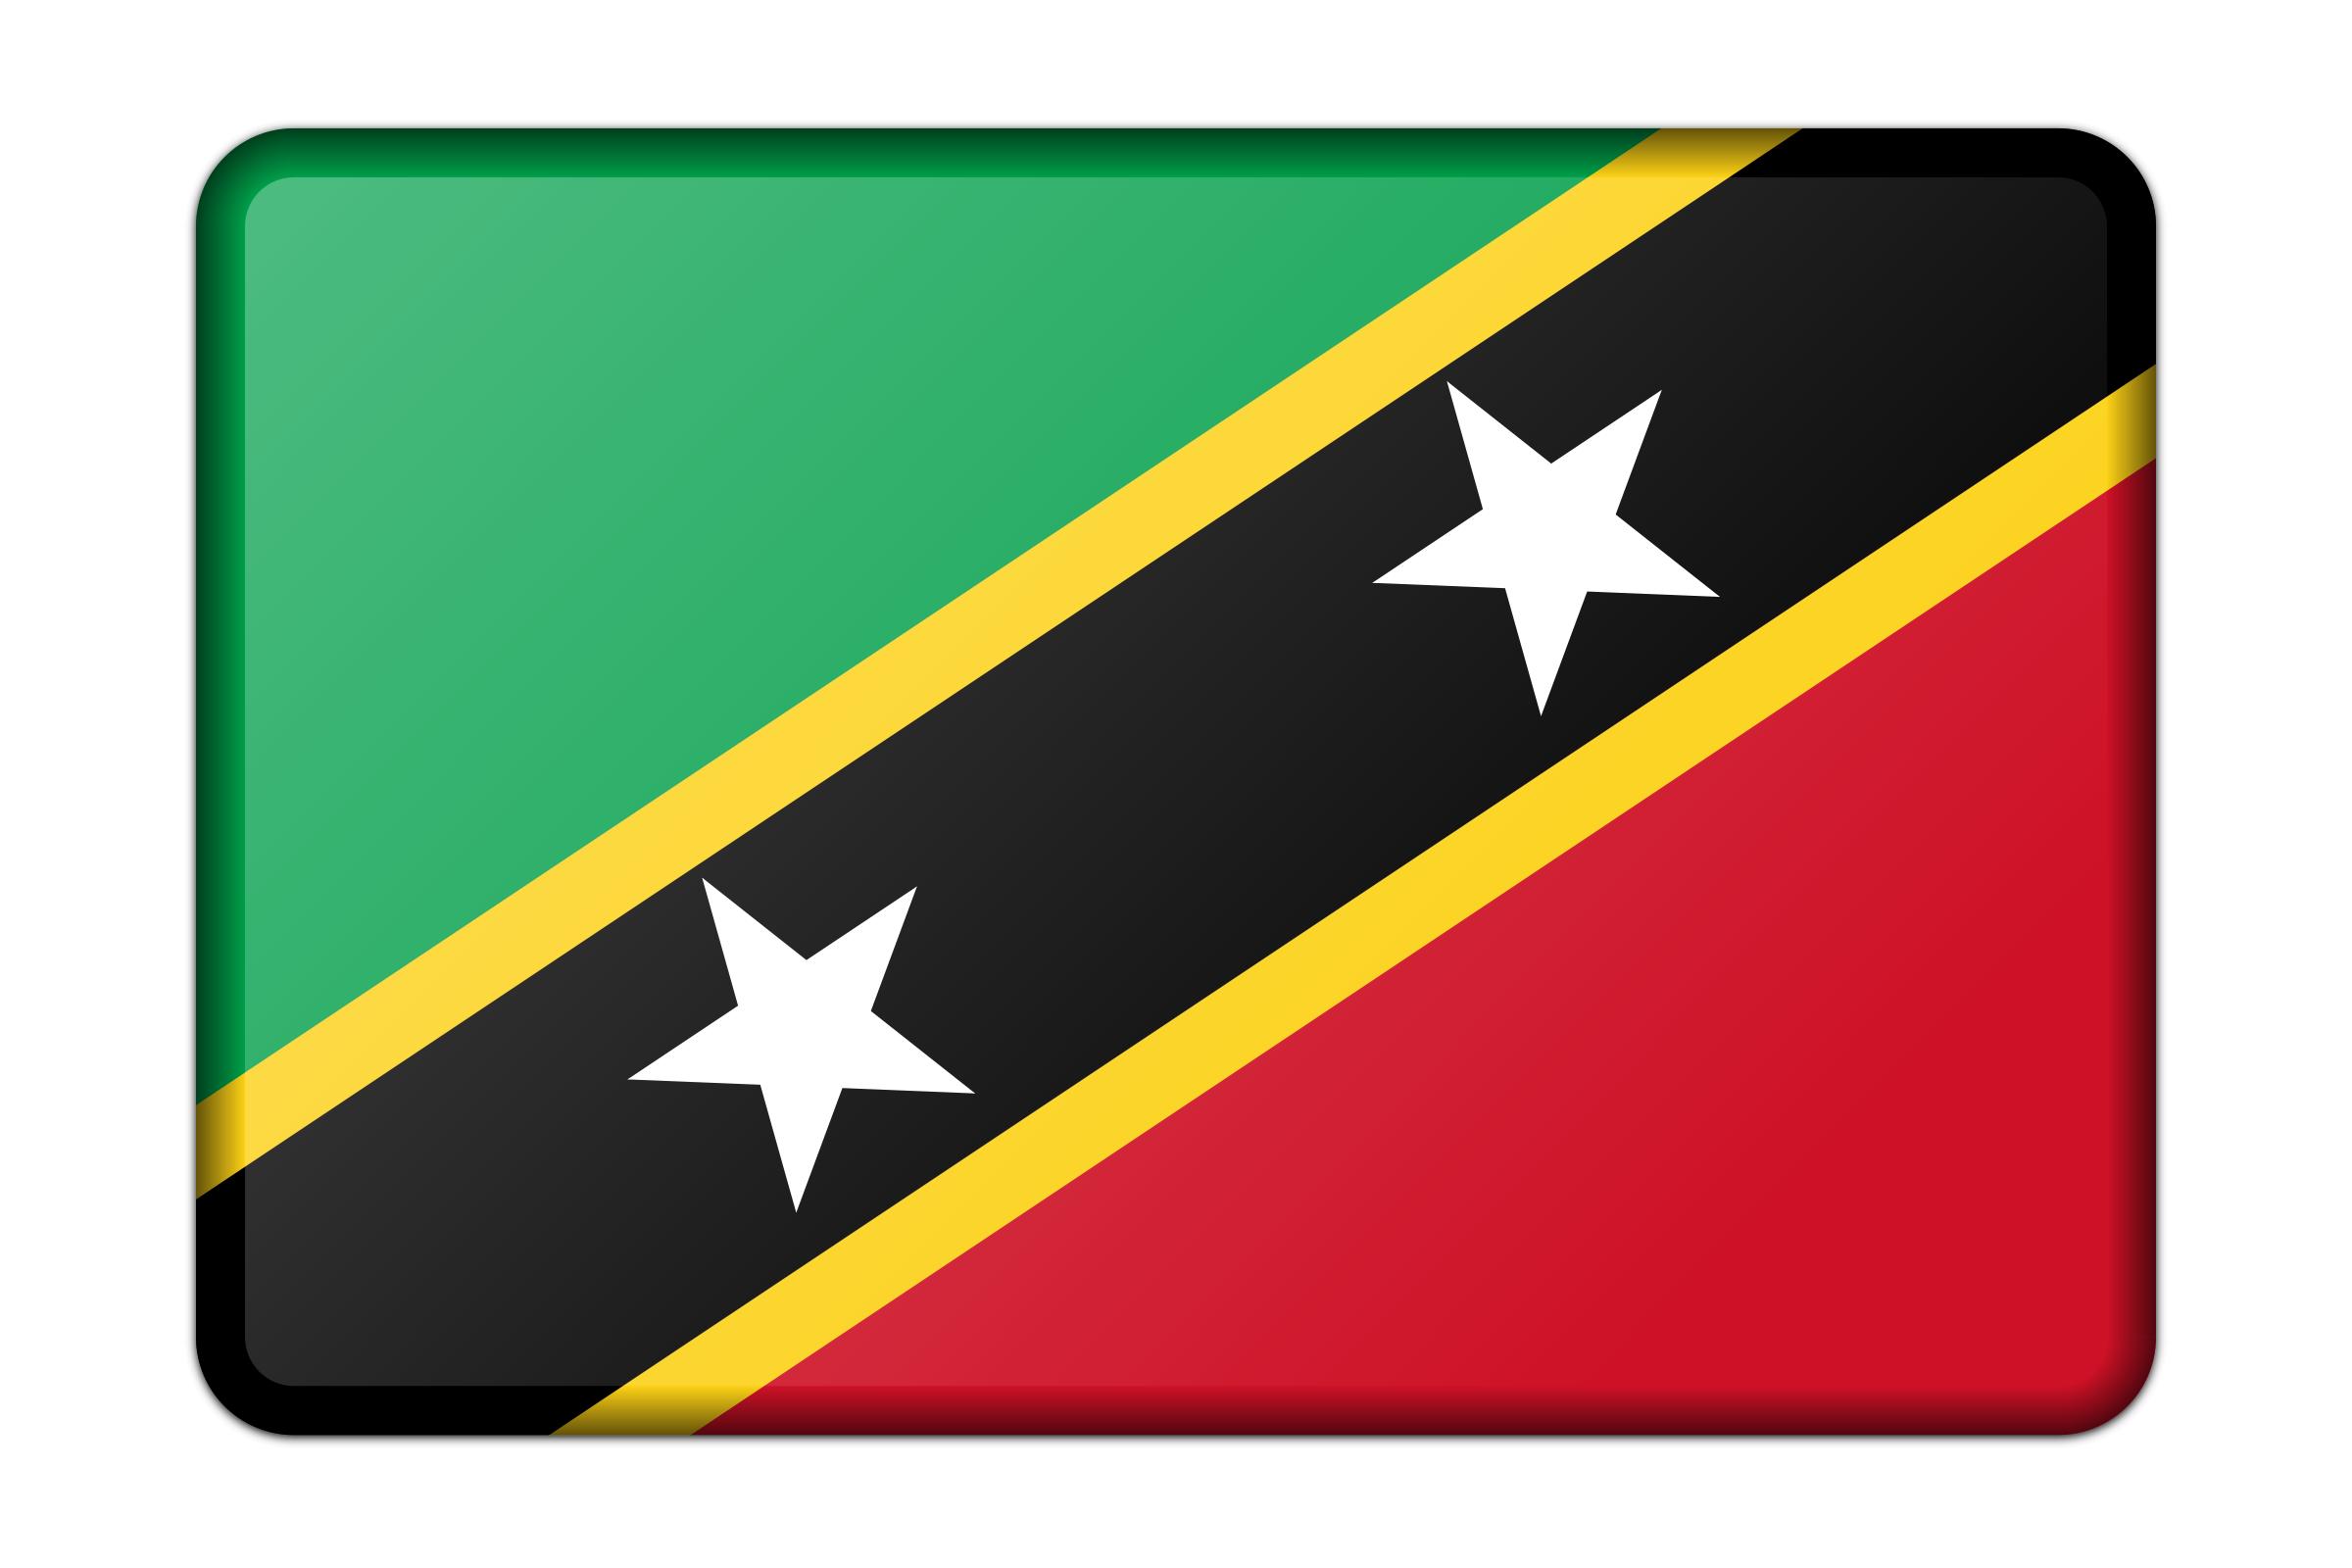 St Kitts and Nevis flag icons